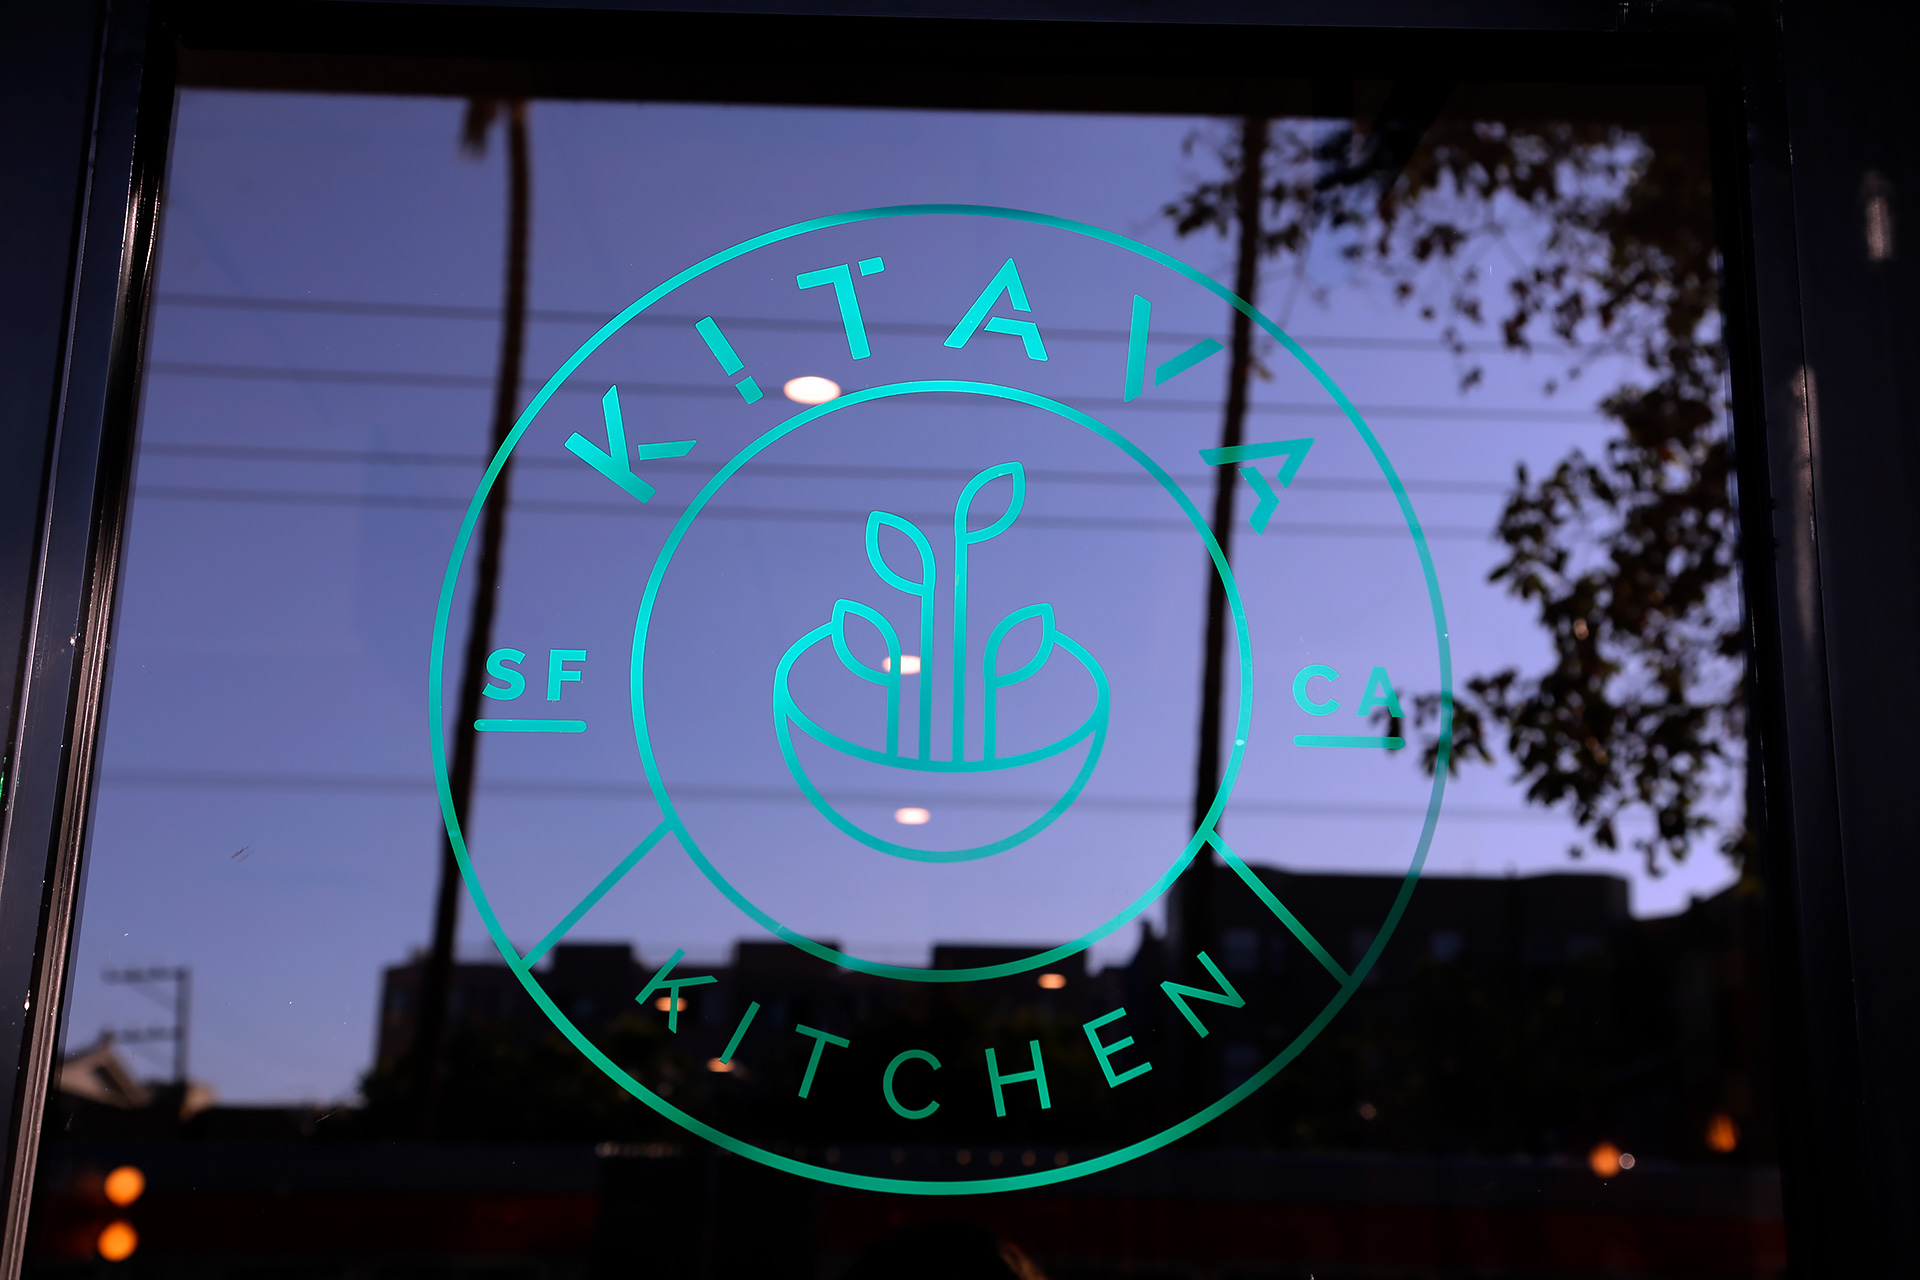 Kitava Kitchen logo on the doorway at Mission and 16th.